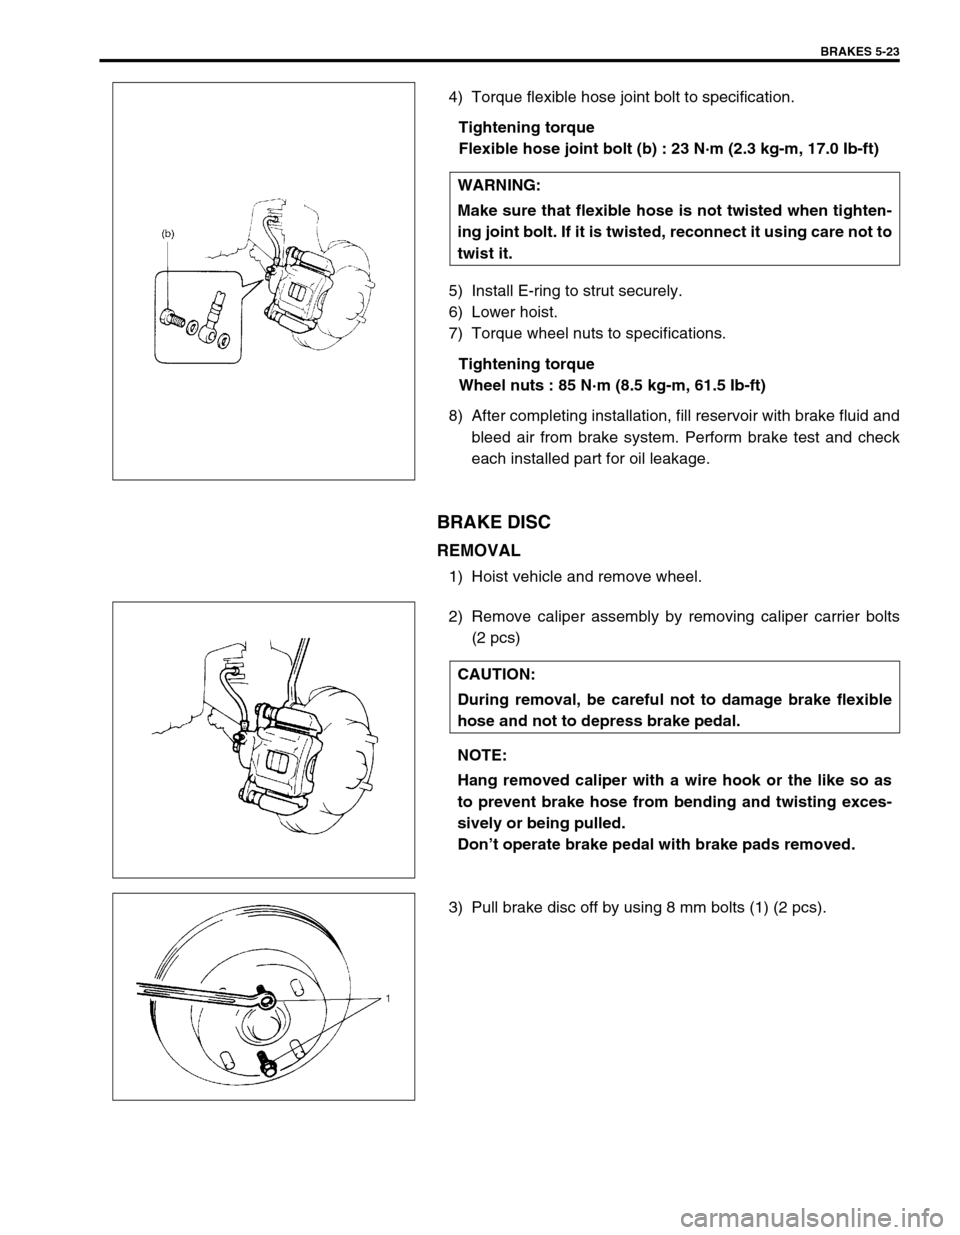 SUZUKI SWIFT 2000 1.G RG413 Service Owners Manual BRAKES 5-23
4) Torque flexible hose joint bolt to specification.
Tightening torque
Flexible hose joint bolt (b) : 23 N·m (2.3 kg-m, 17.0 Ib-ft)
5) Install E-ring to strut securely.
6) Lower hoist.
7)